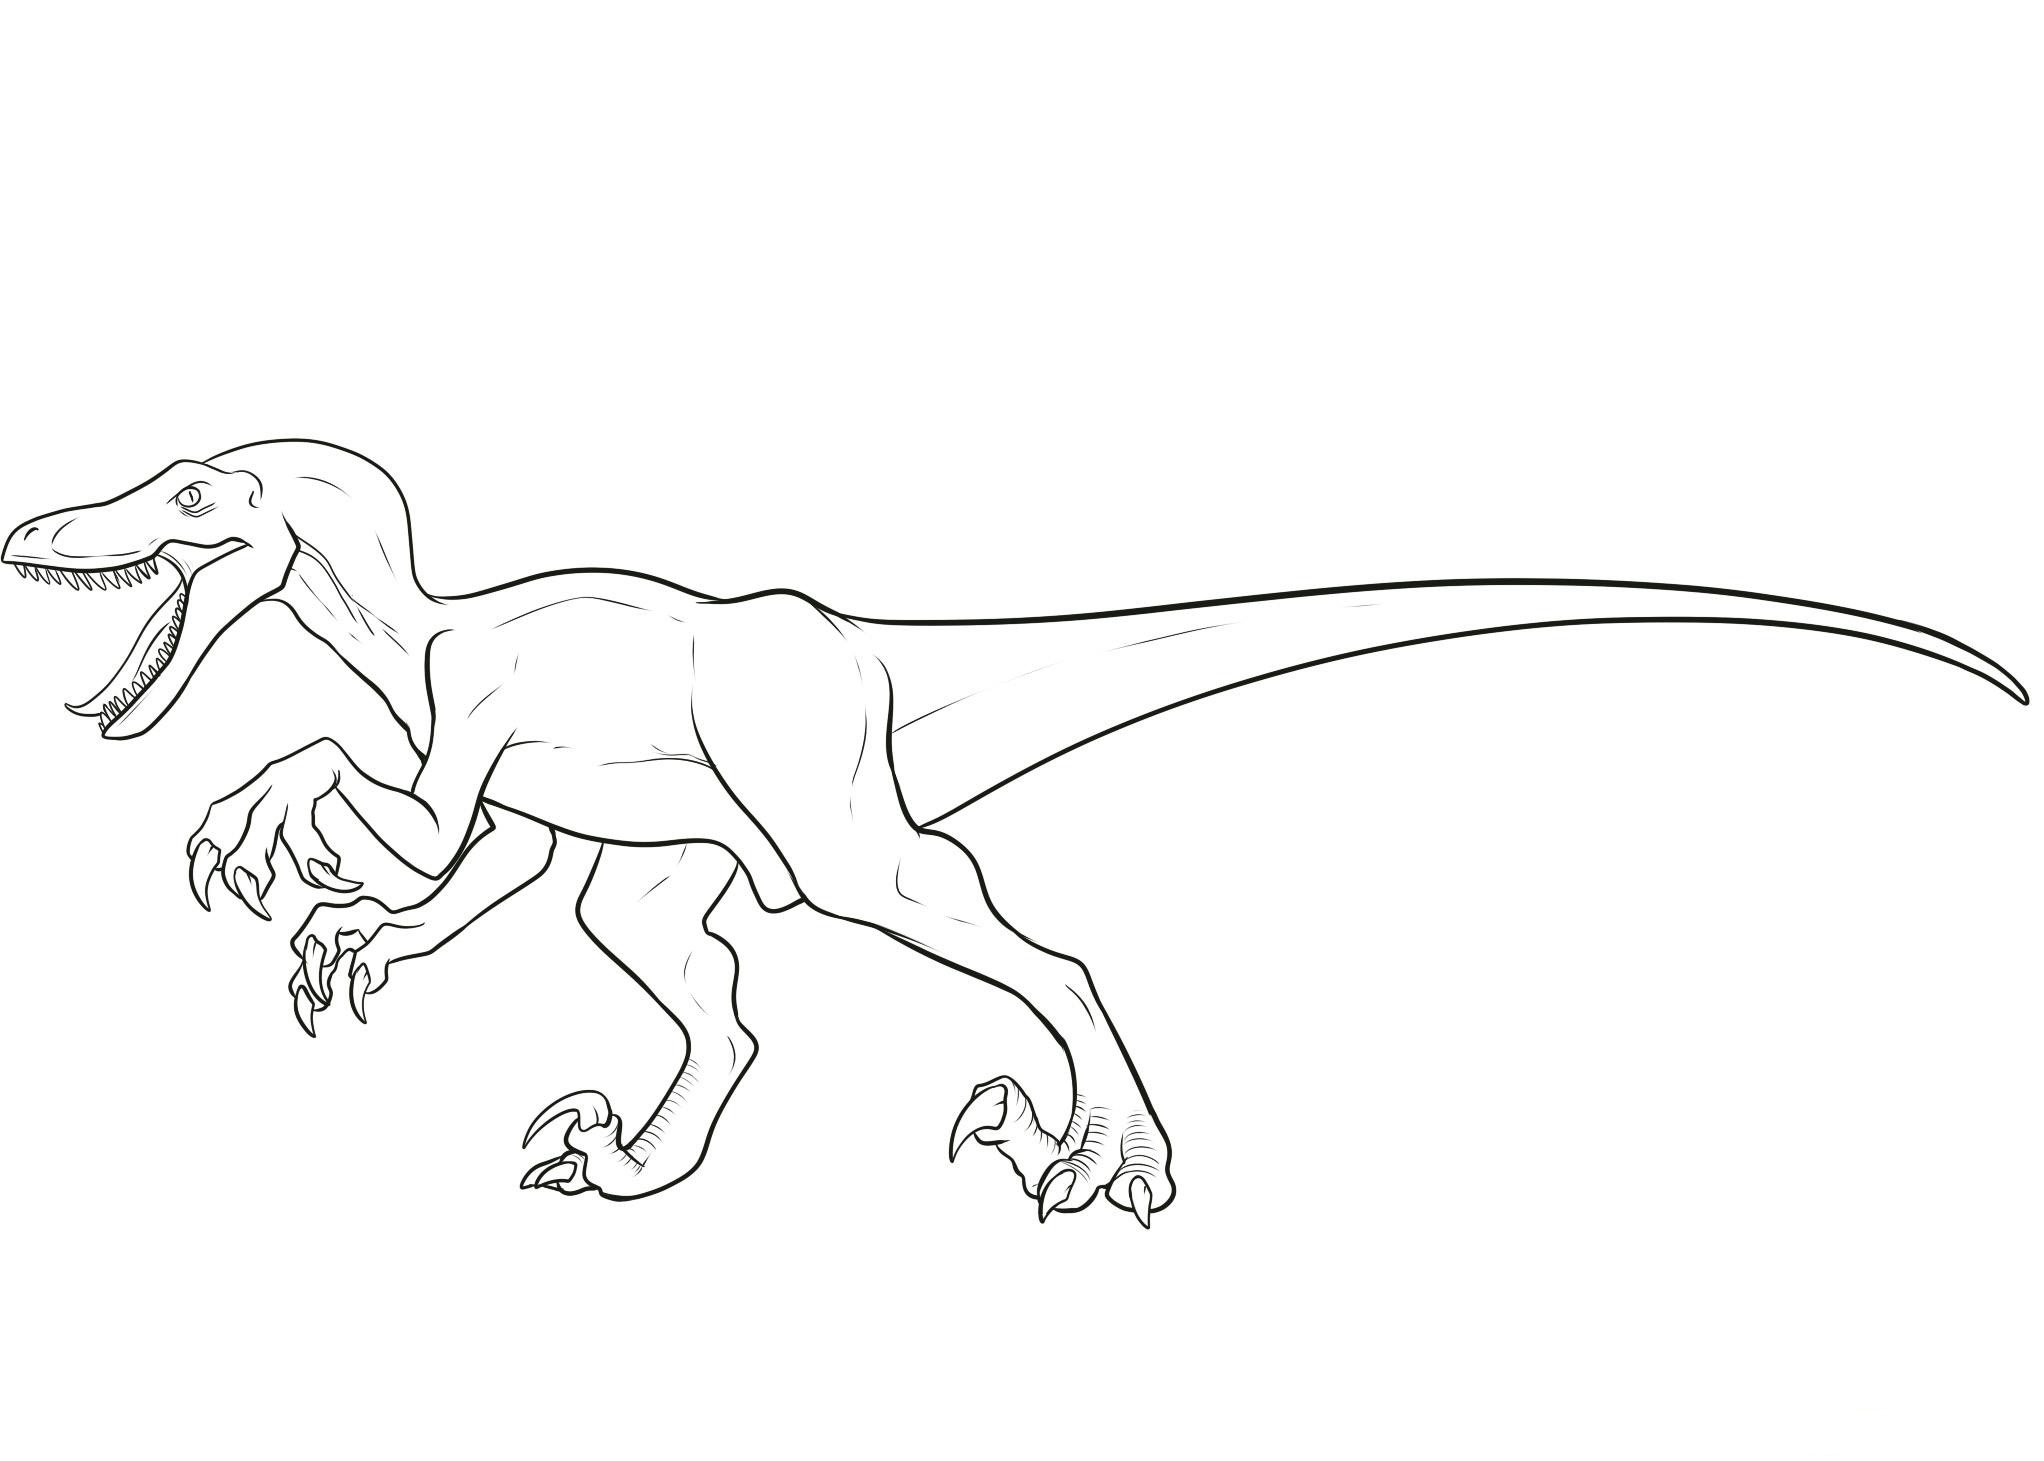 Jurassic World Coloring Pages.